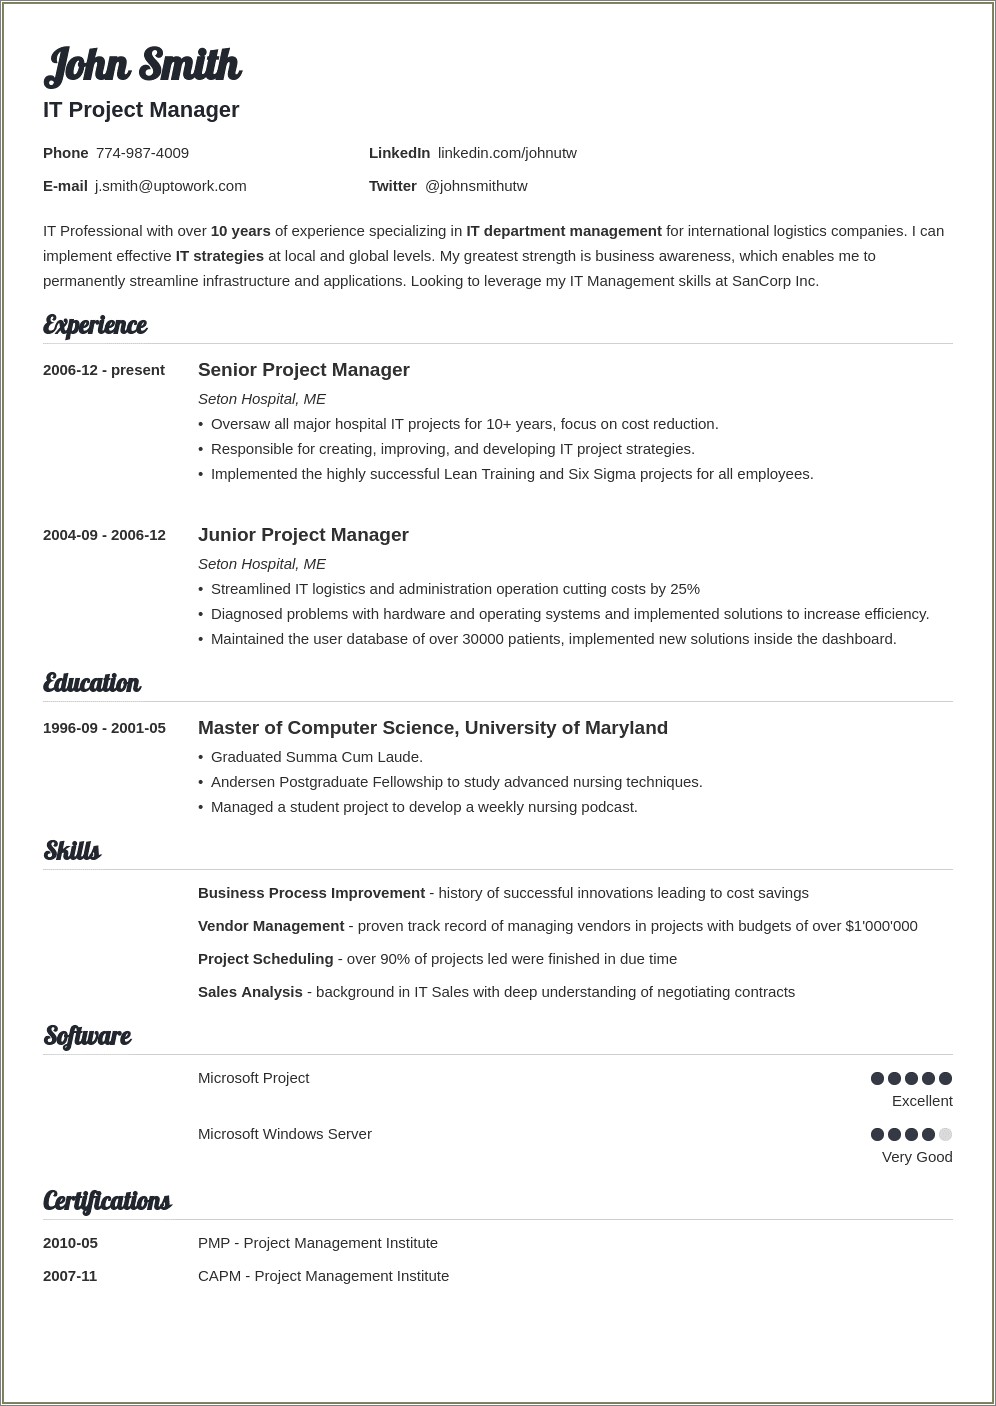 Backgound For The Header In Resume Word